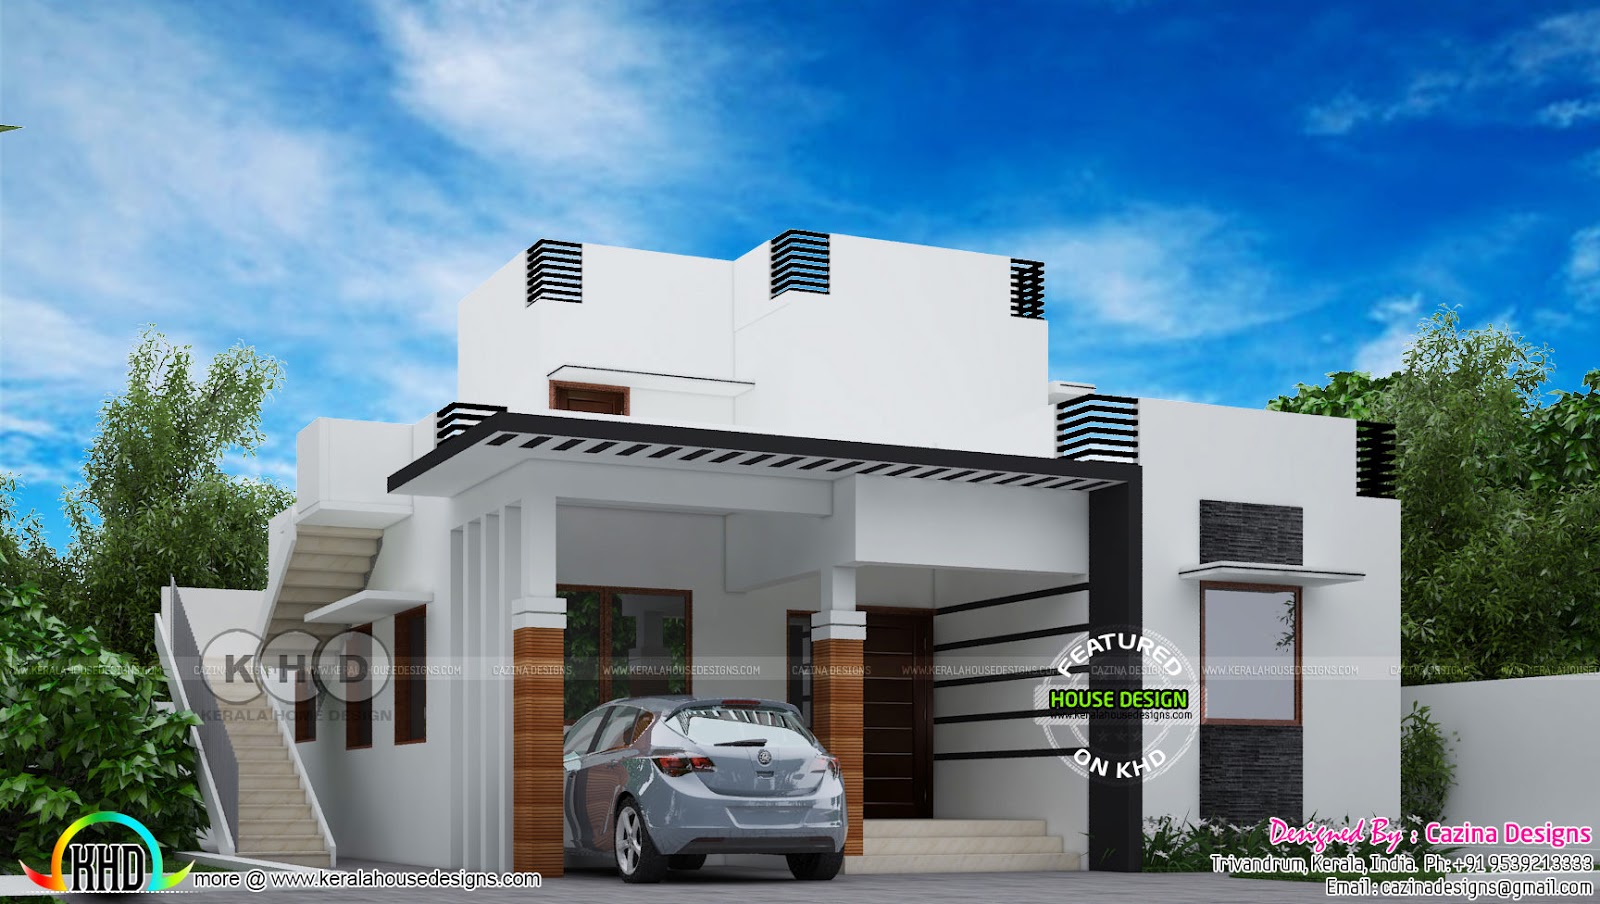  1200  sq  ft  small double storied house  plan  Kerala home  